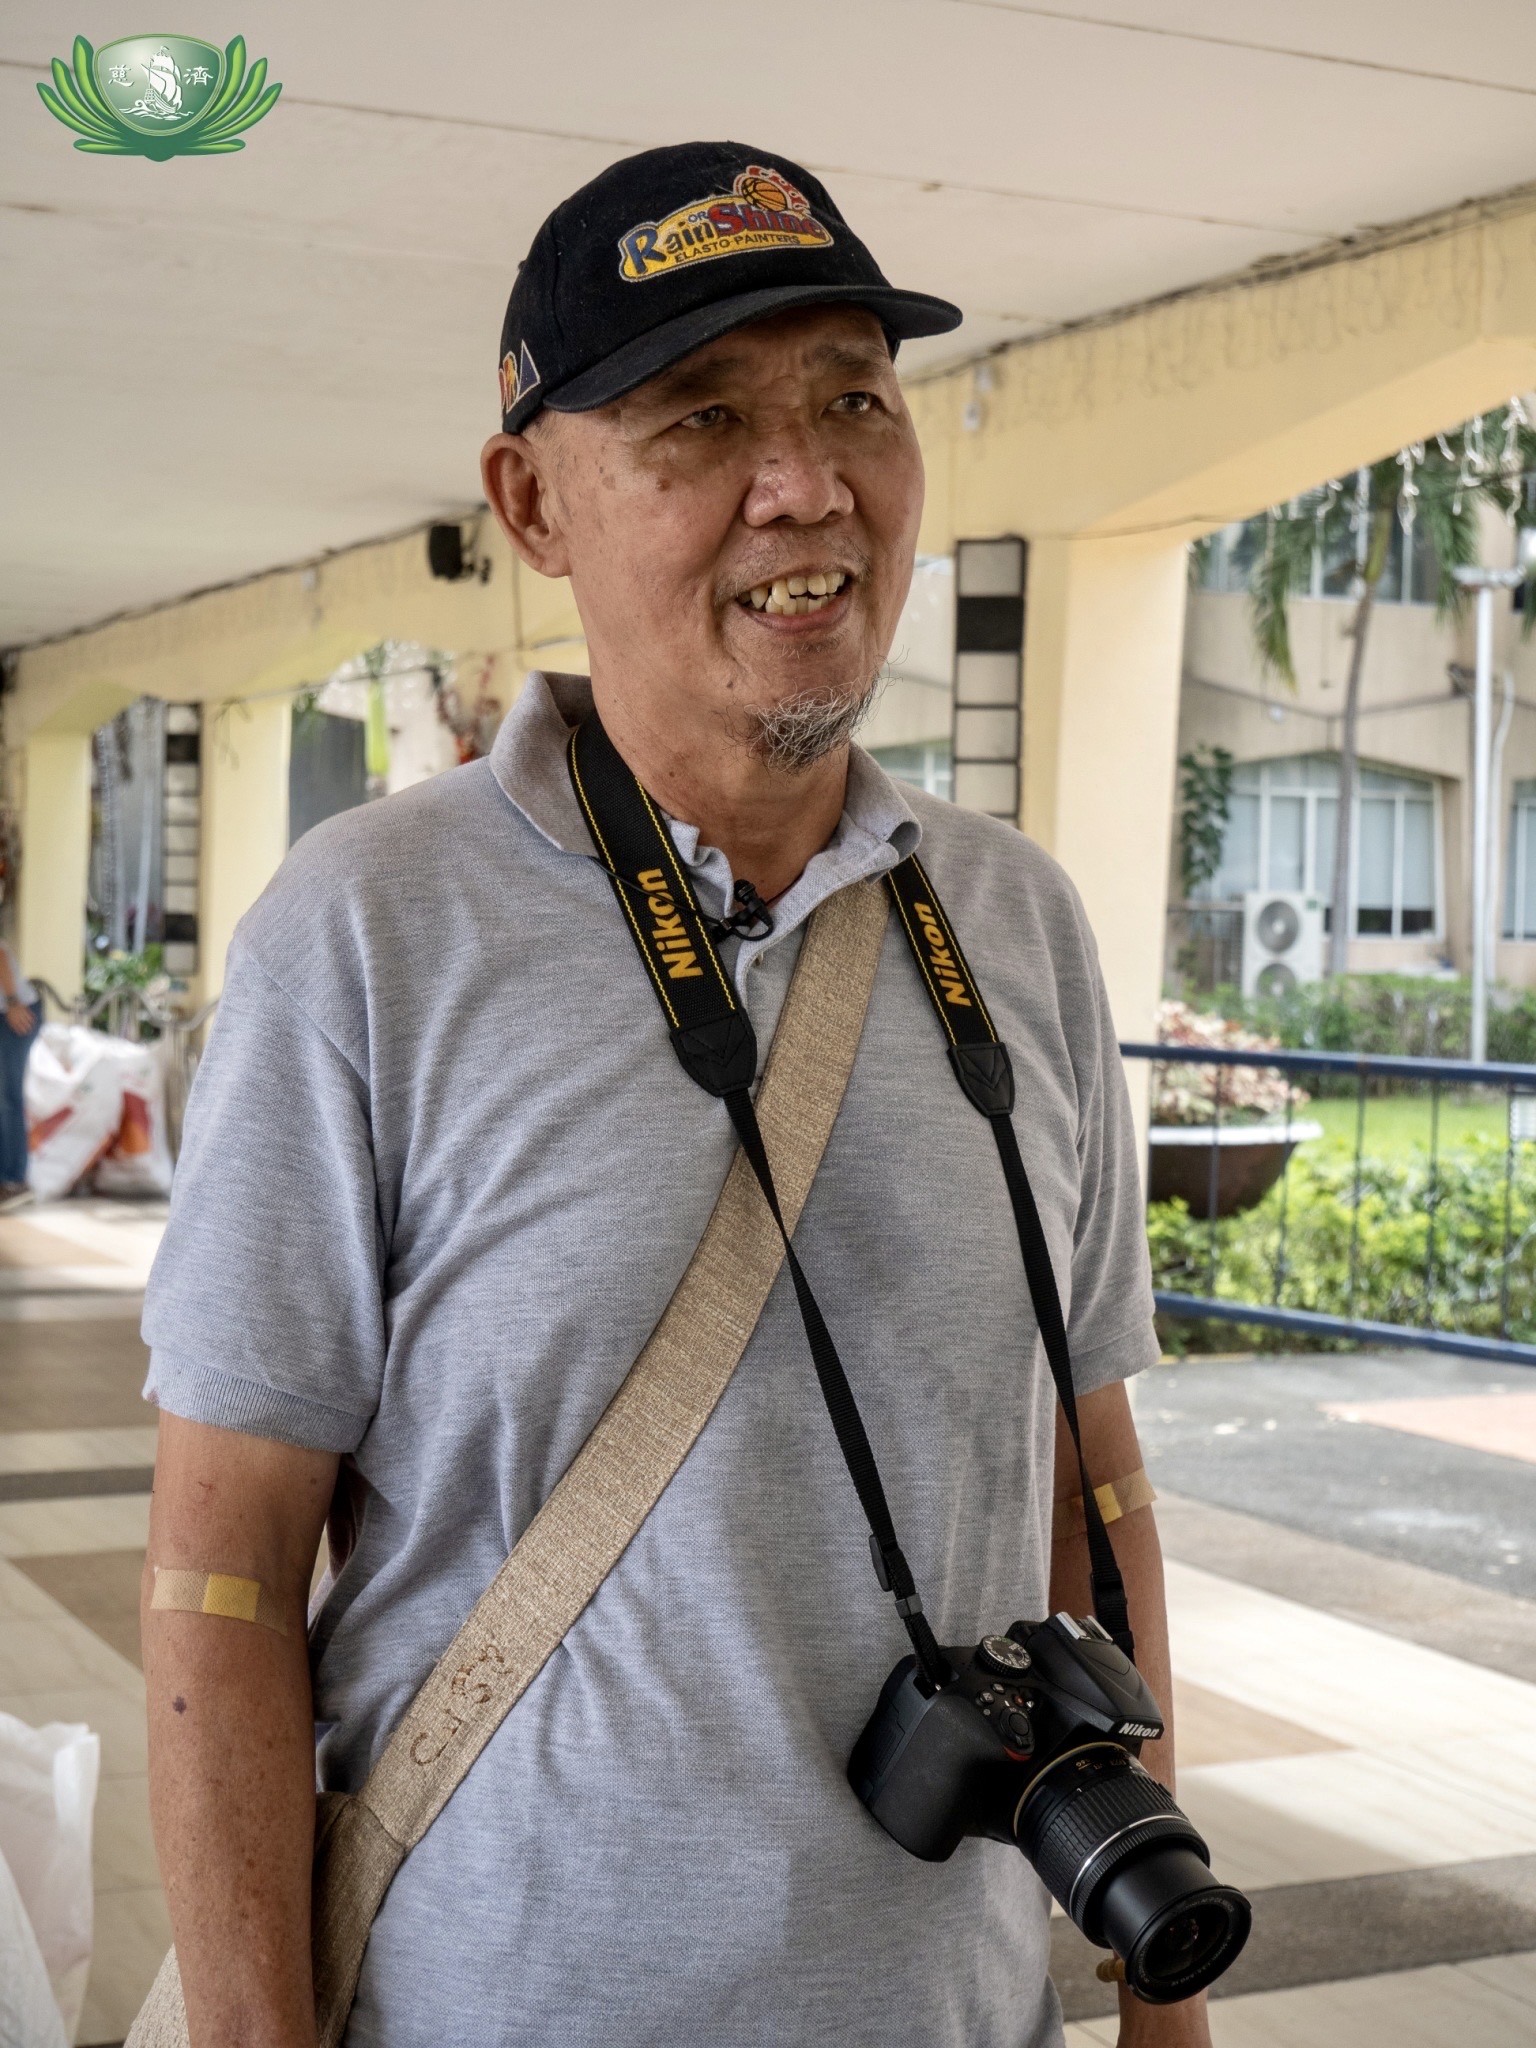 A beneficiary of the Tzu Chi Foundation Eye Center, Eduardo Yañez volunteers to Tzu Chi’s many events “to return the kindness that Tzu Chi showed me.” The retired artist helps in any way he can. One minute he’ll be taking pictures of a rice distribution event, the next minute he’ll be hauling 10-kg sacks of rice himself. 